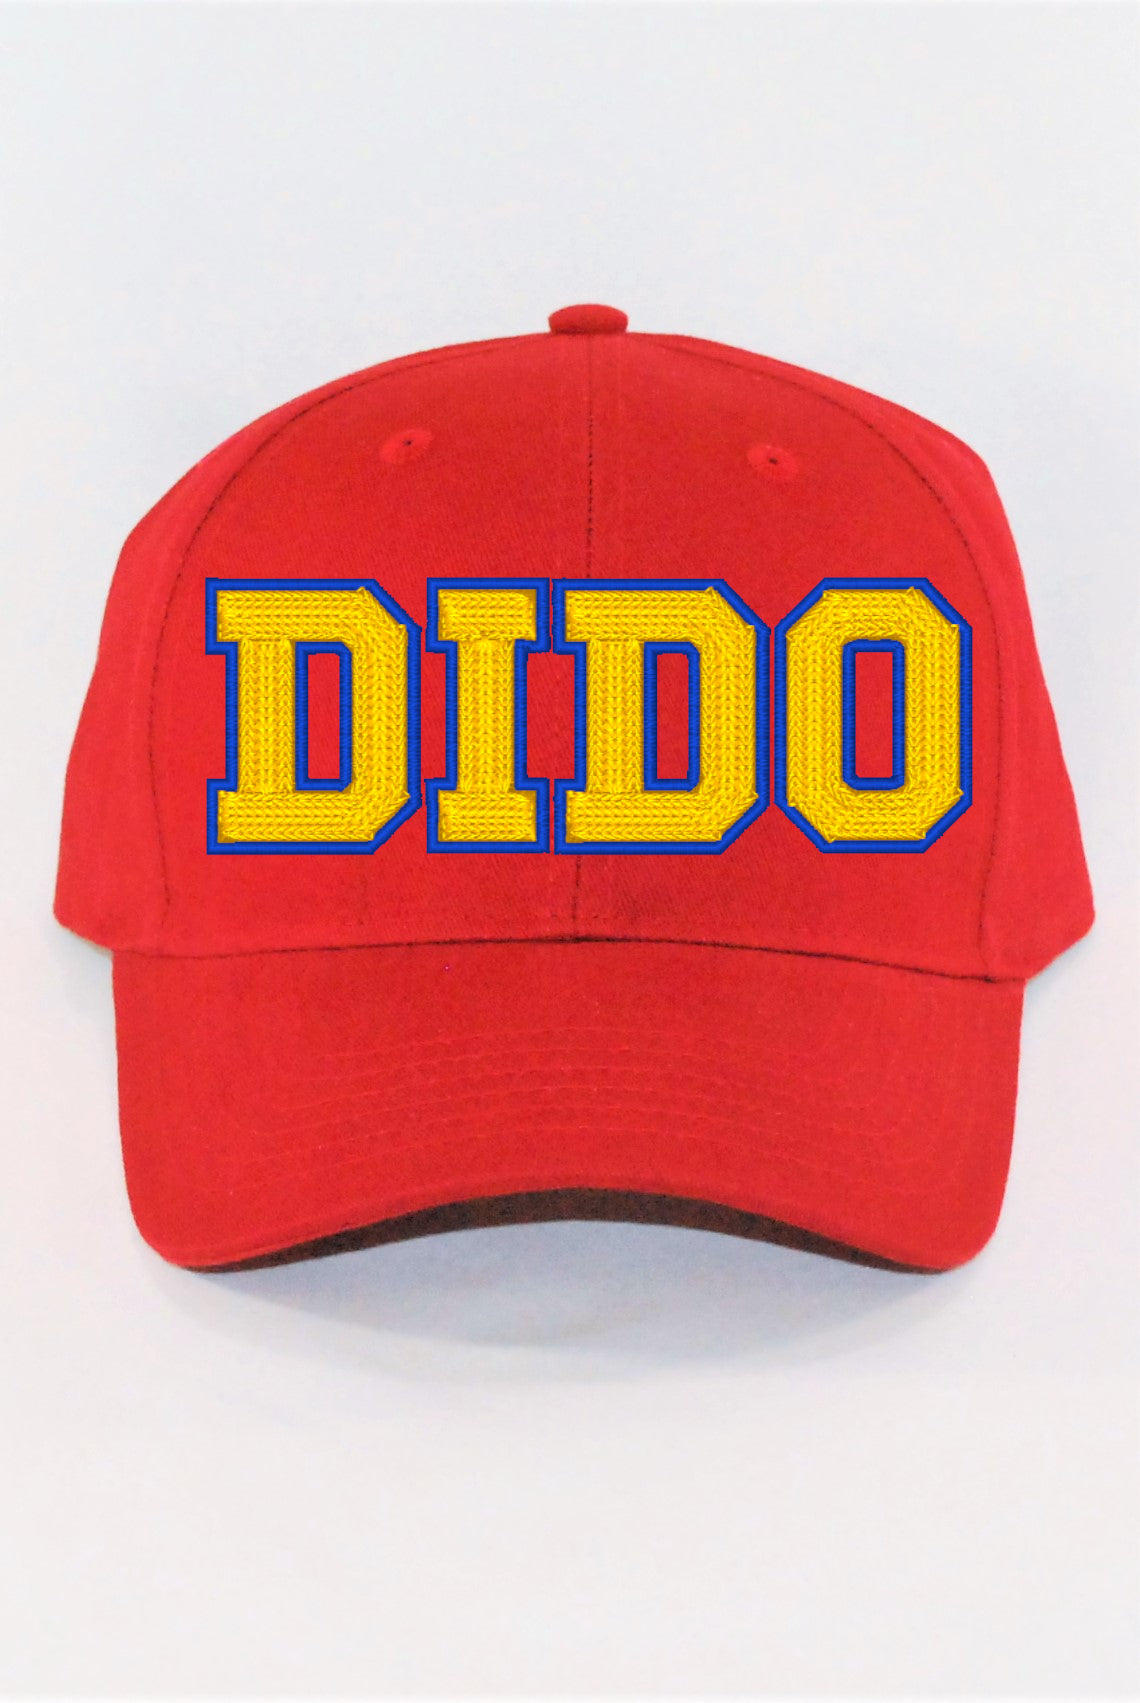 3D embroidered hat "DIDO"